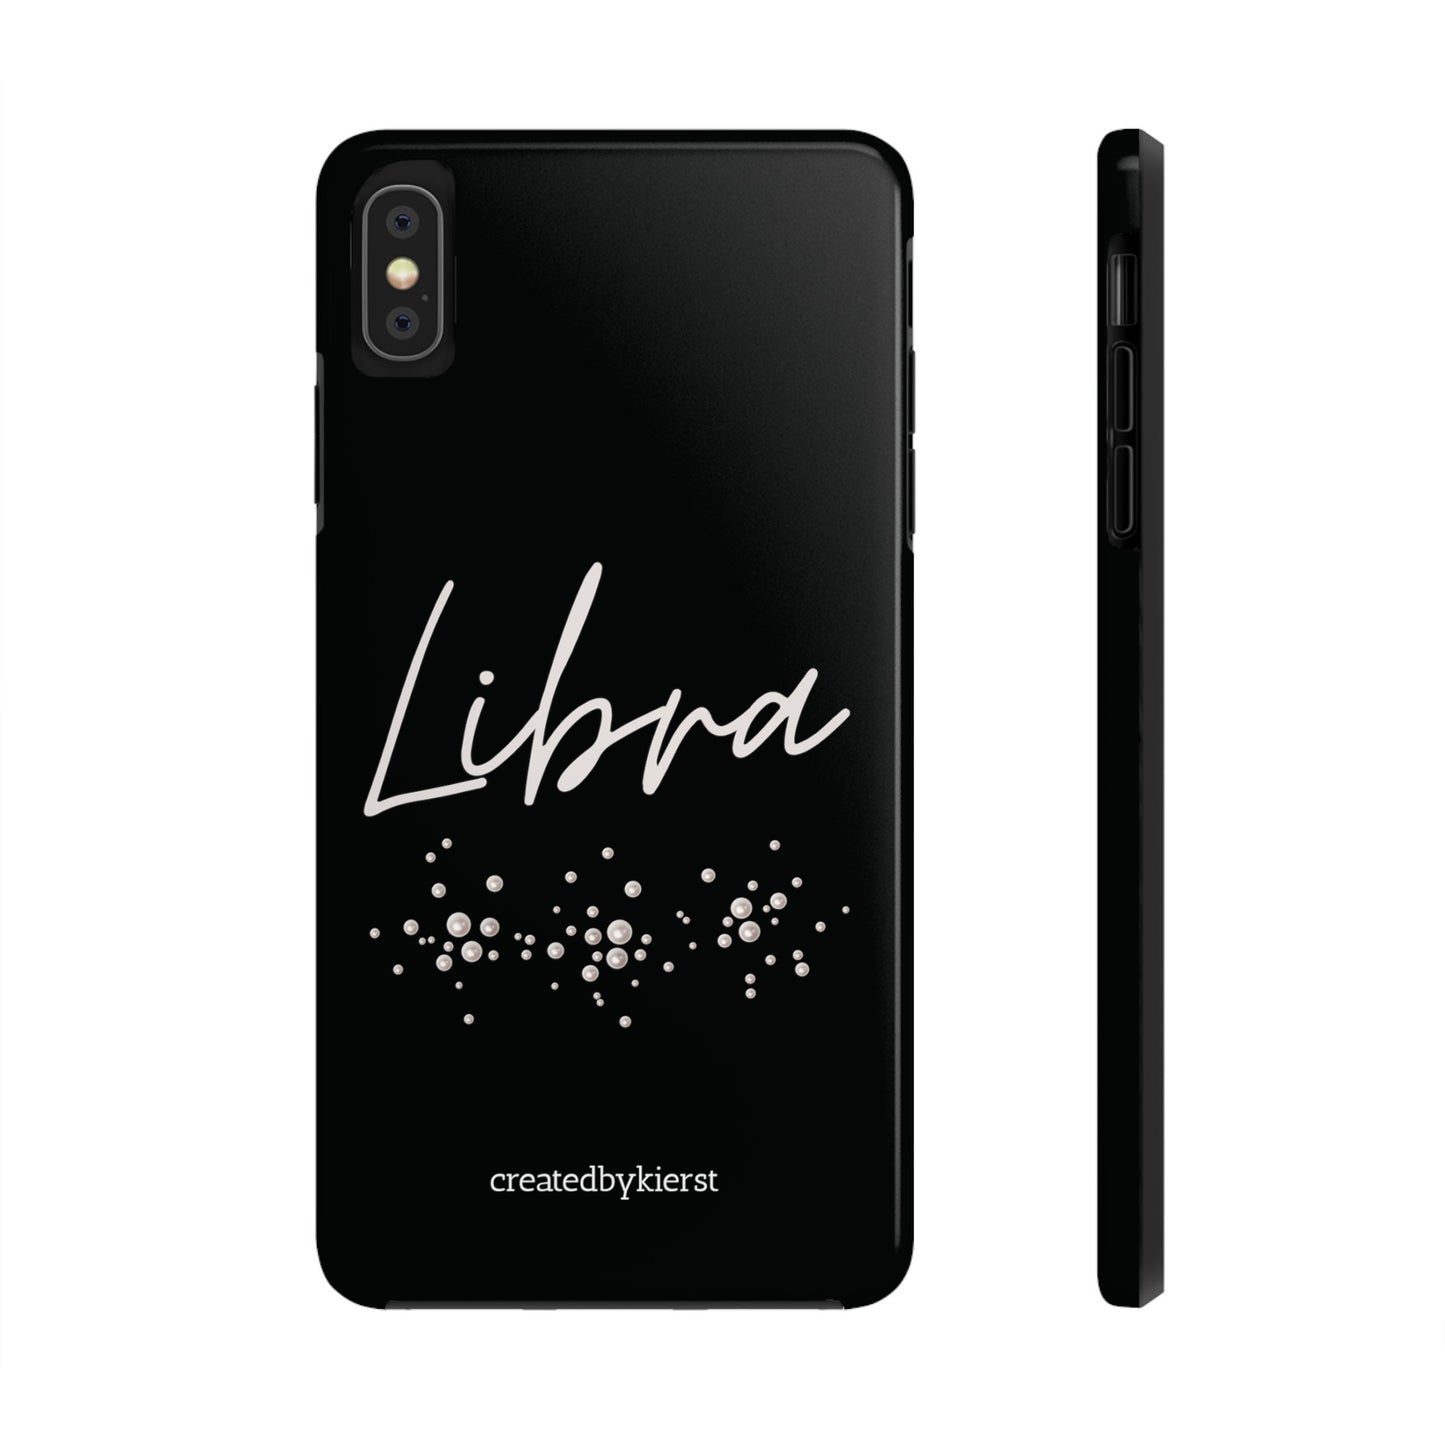 Libra and Pearls Black iPhone Case